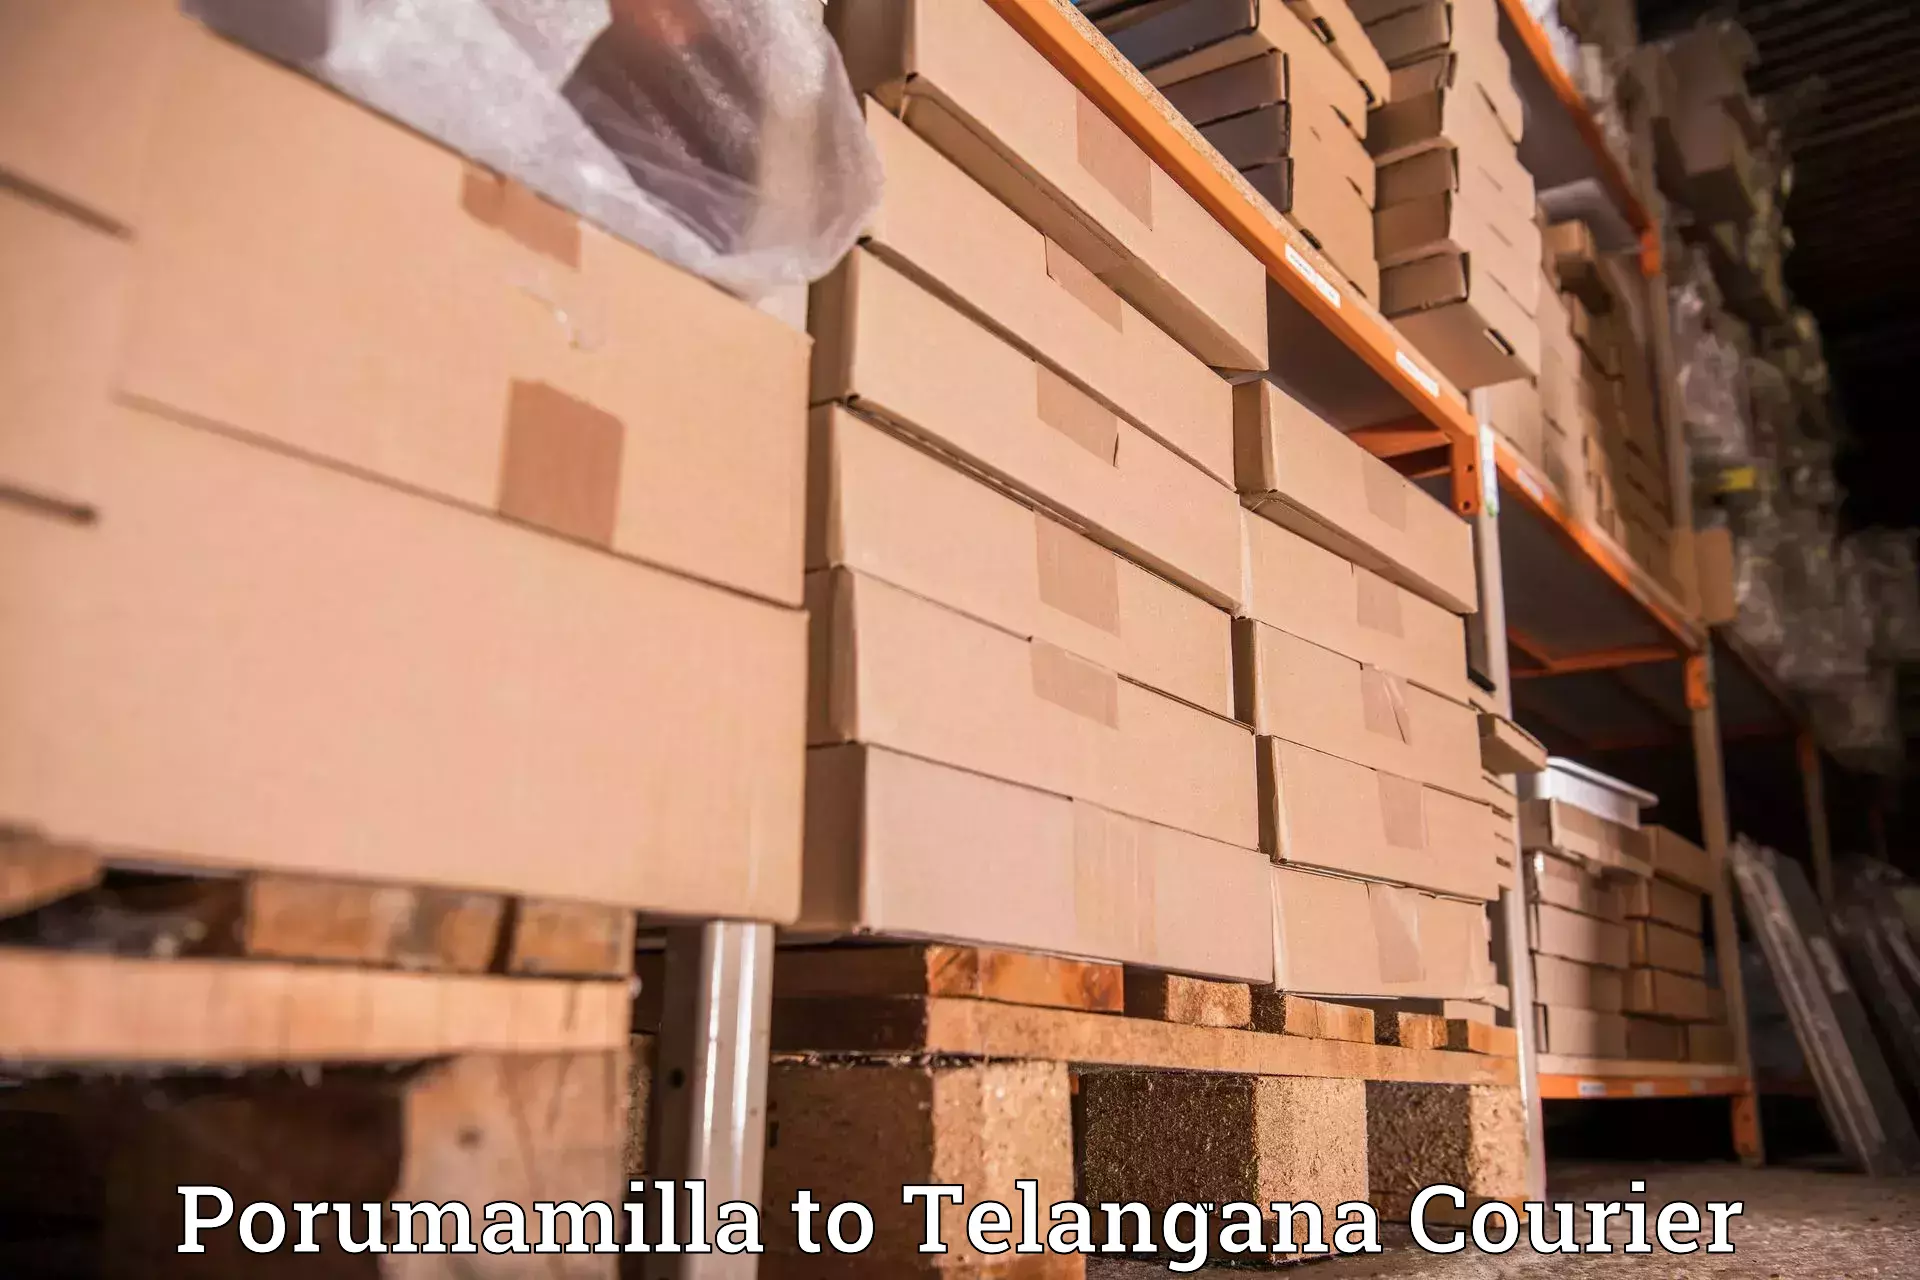 Local courier options in Porumamilla to Eligedu